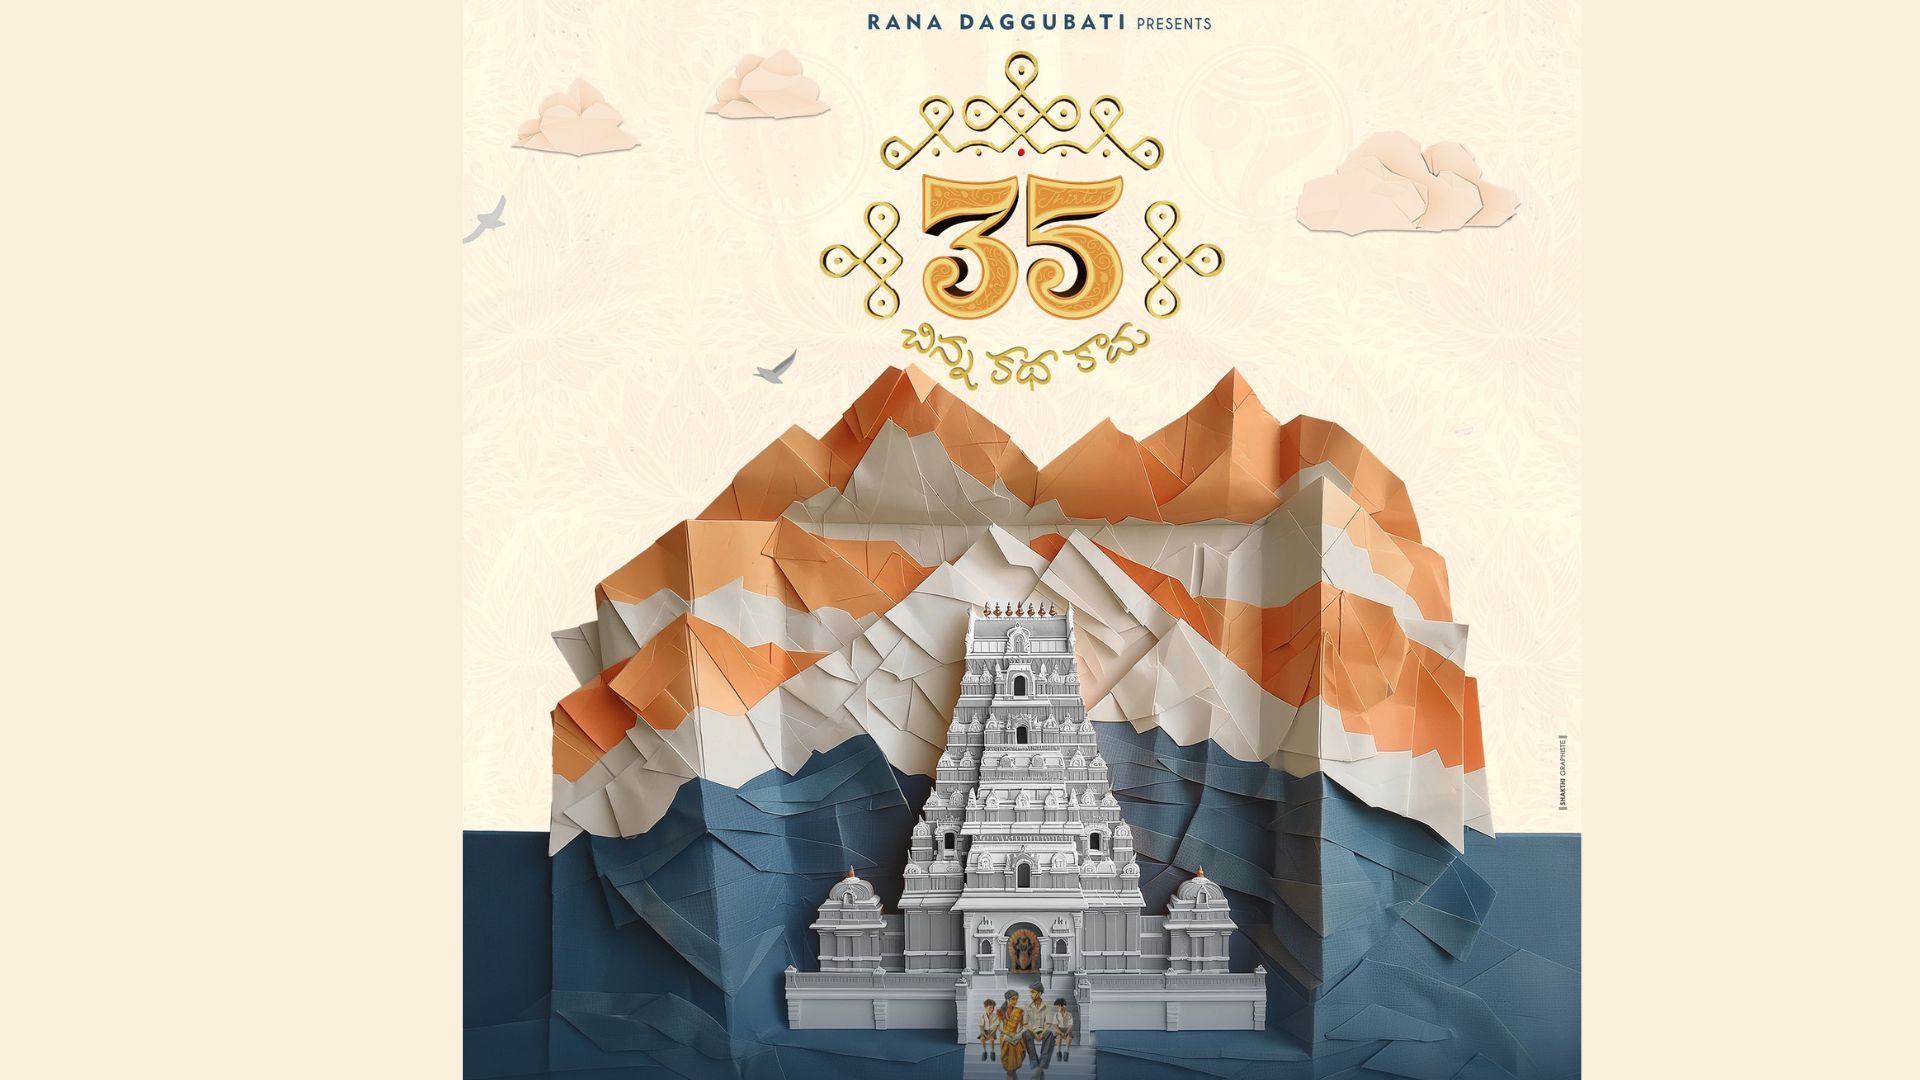 Rana Daggubati introduces the film '35 Movie', revealing its poster and title